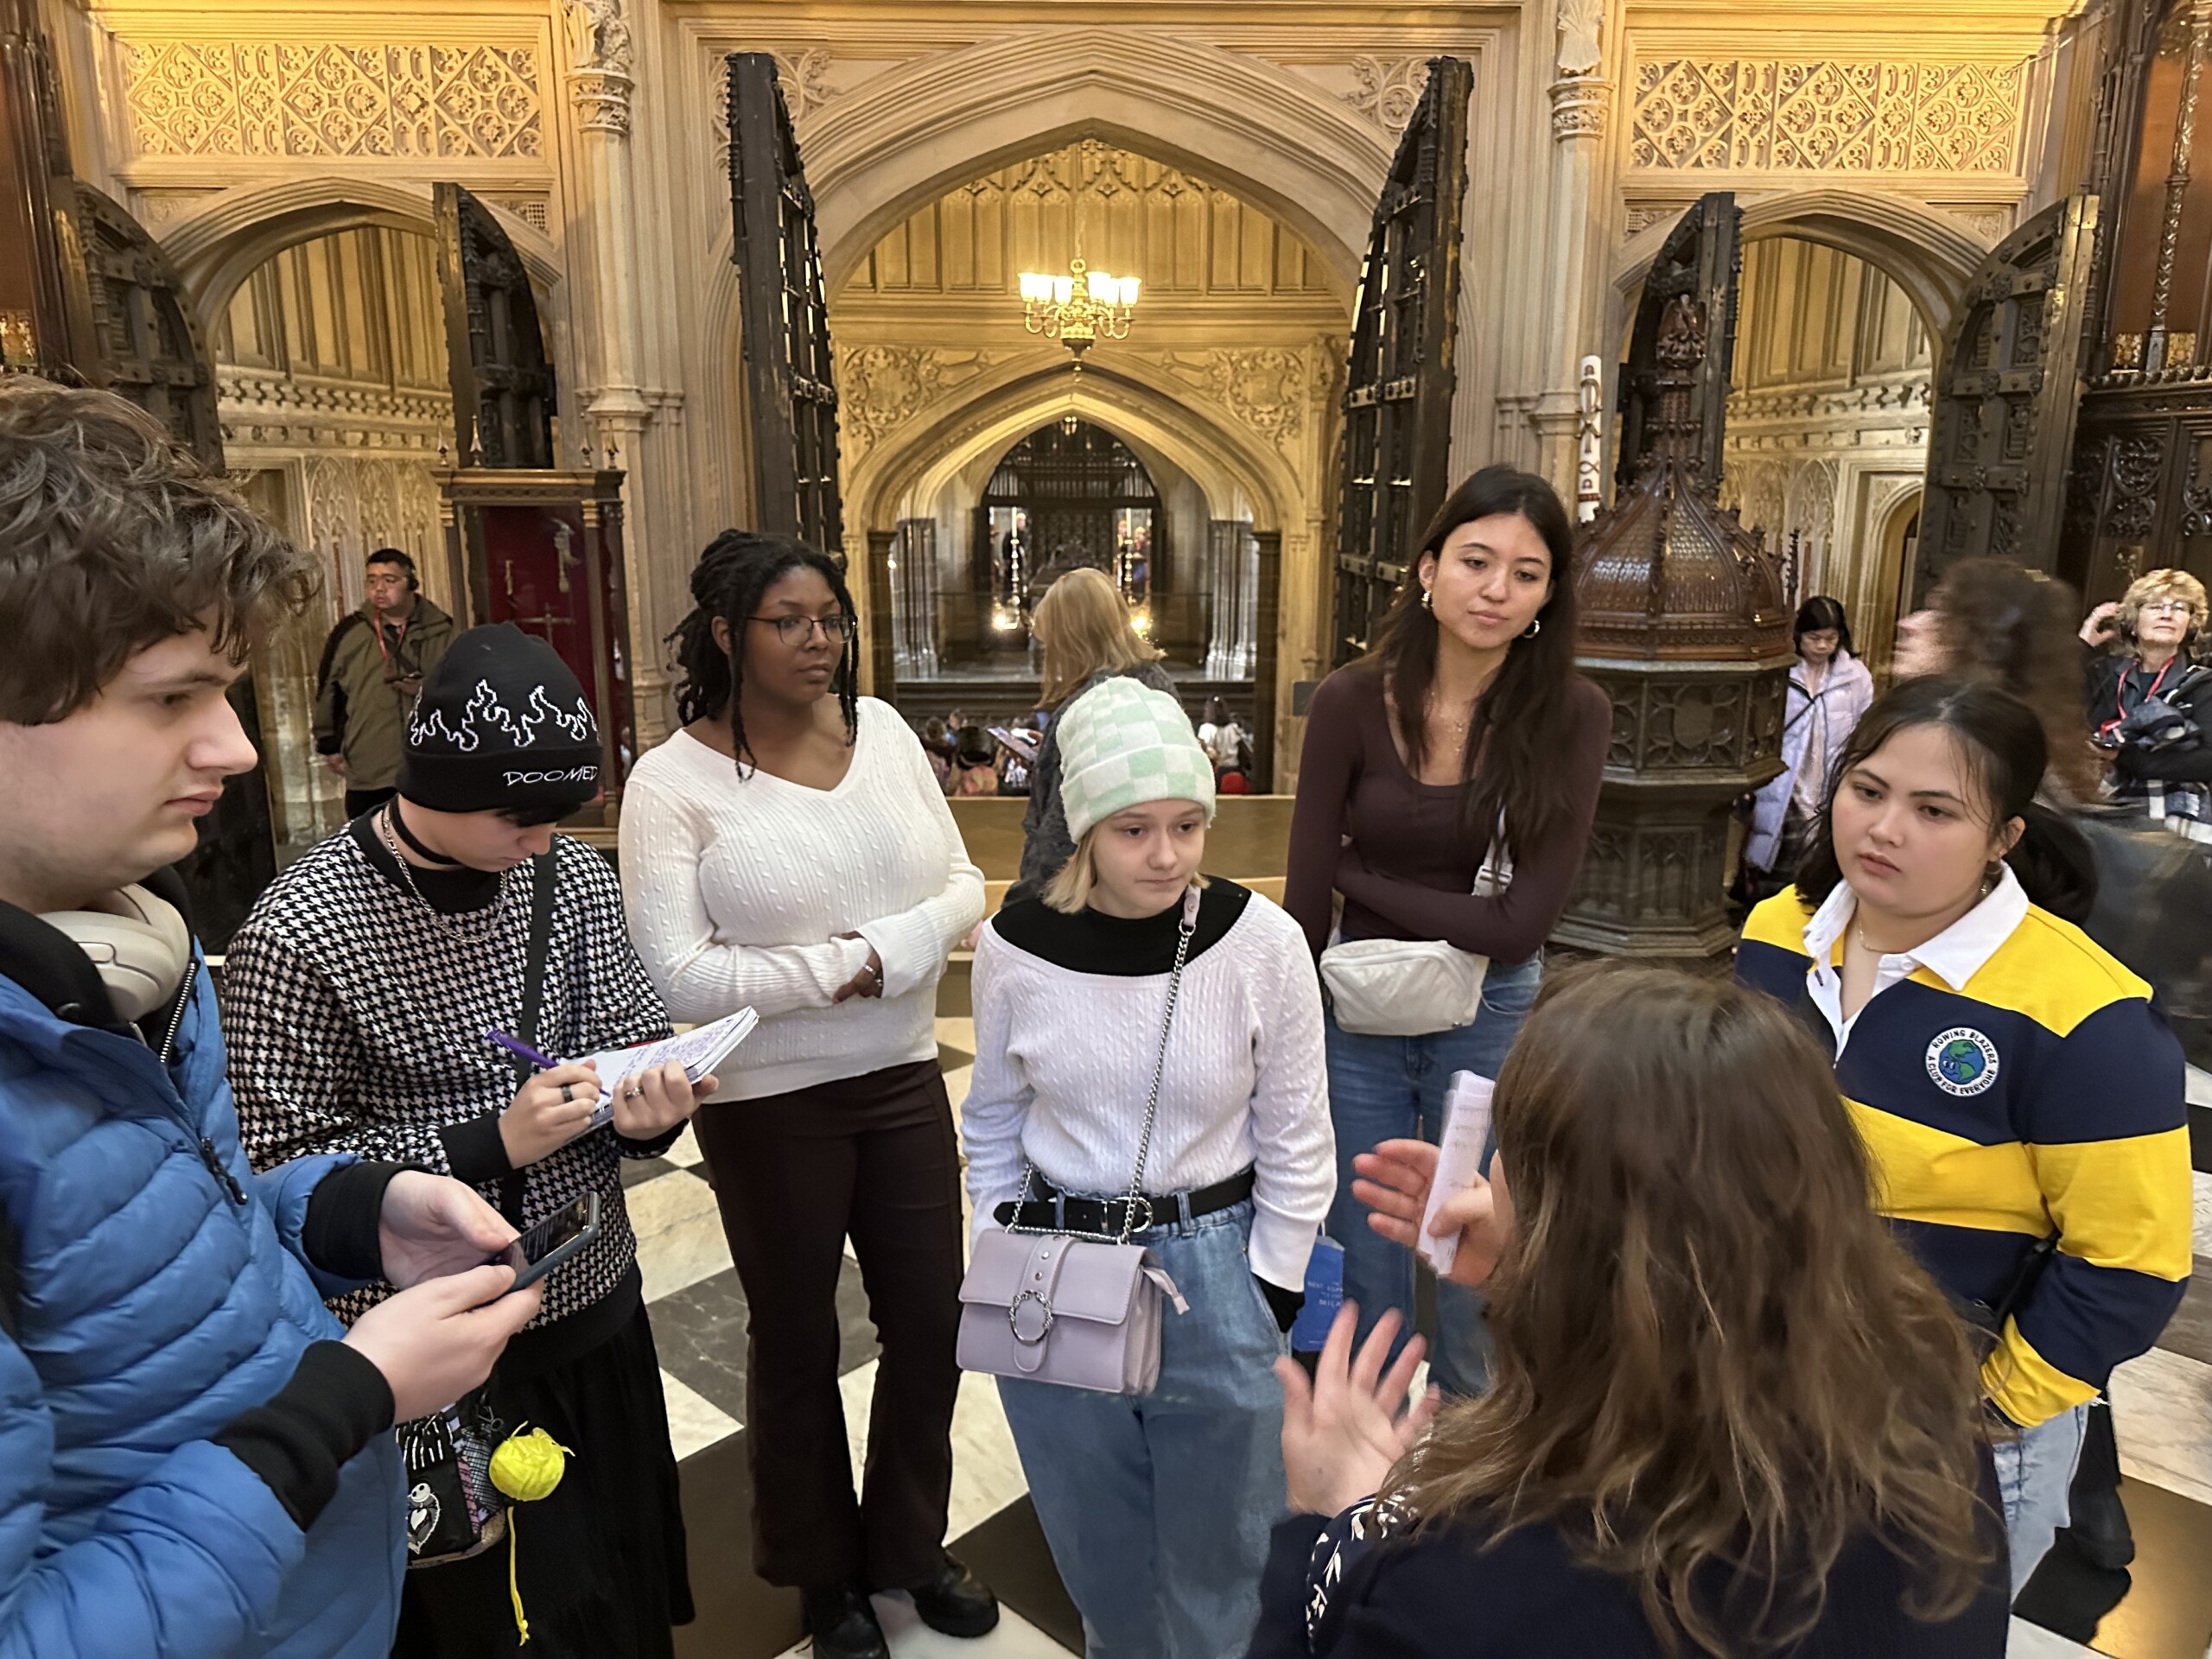 The back of a tour guide faces the camera. Students face the tour guide, listening to information about Westminster Abbey.